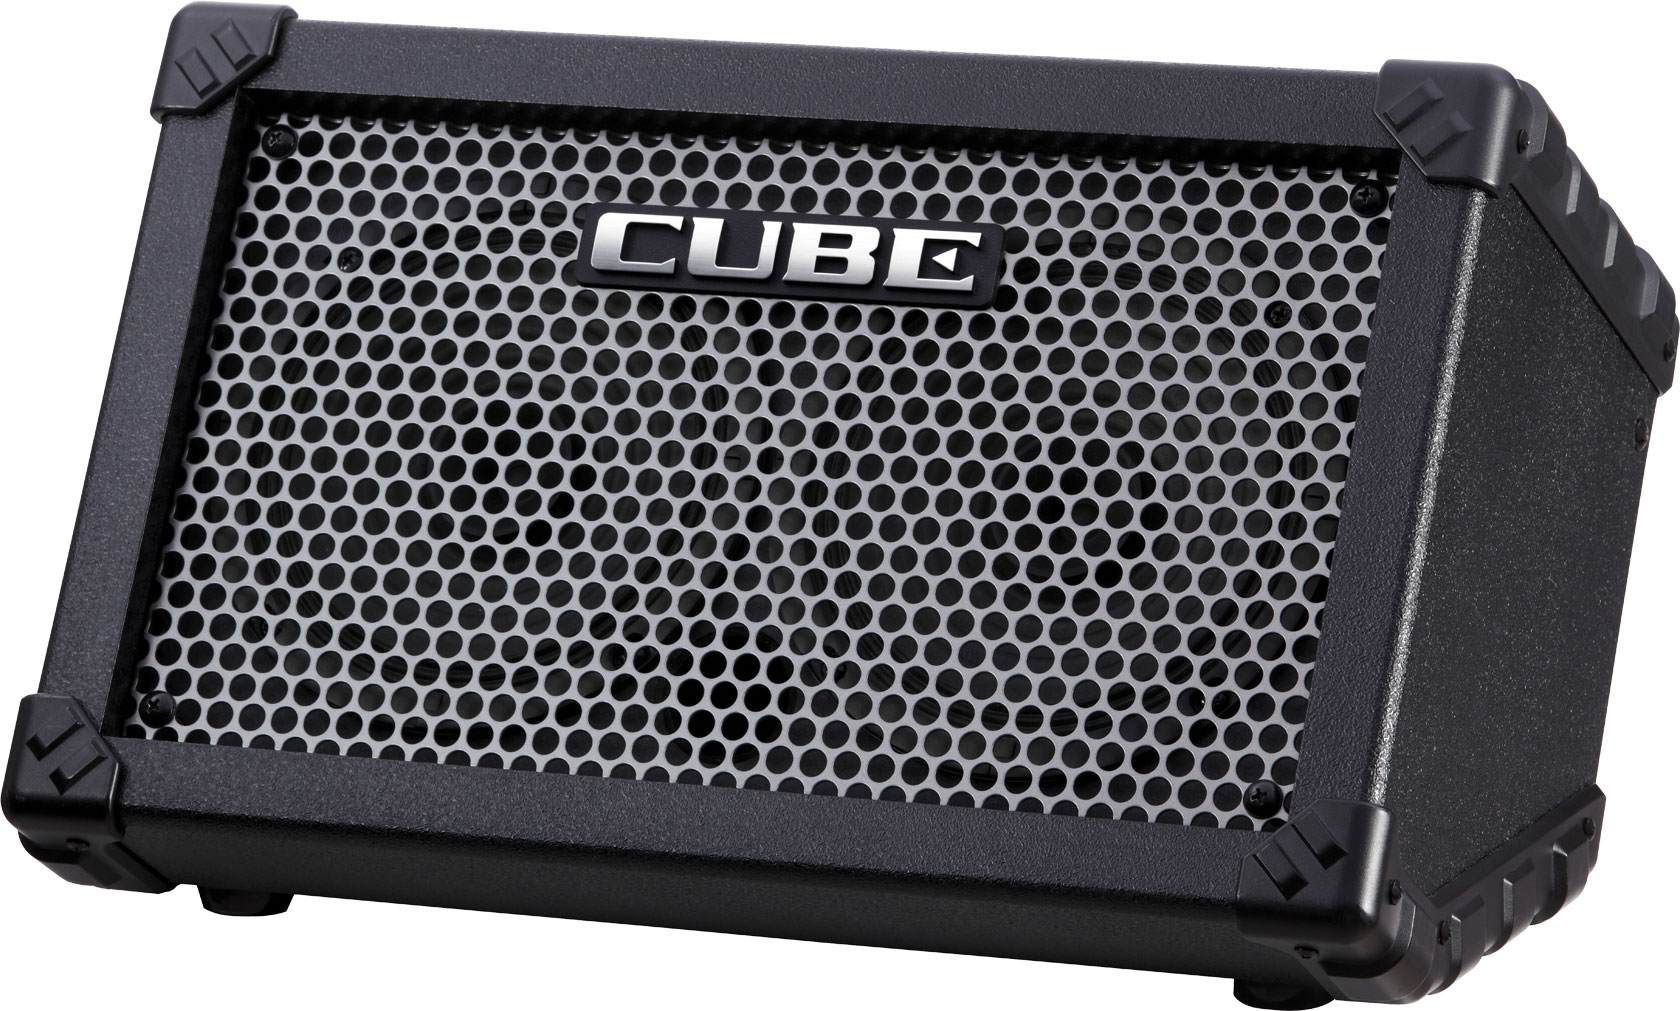 Roland Cube Street Battery Stereo Amplifier 2x25w 2x8 Black - Electric guitar combo amp - Variation 3